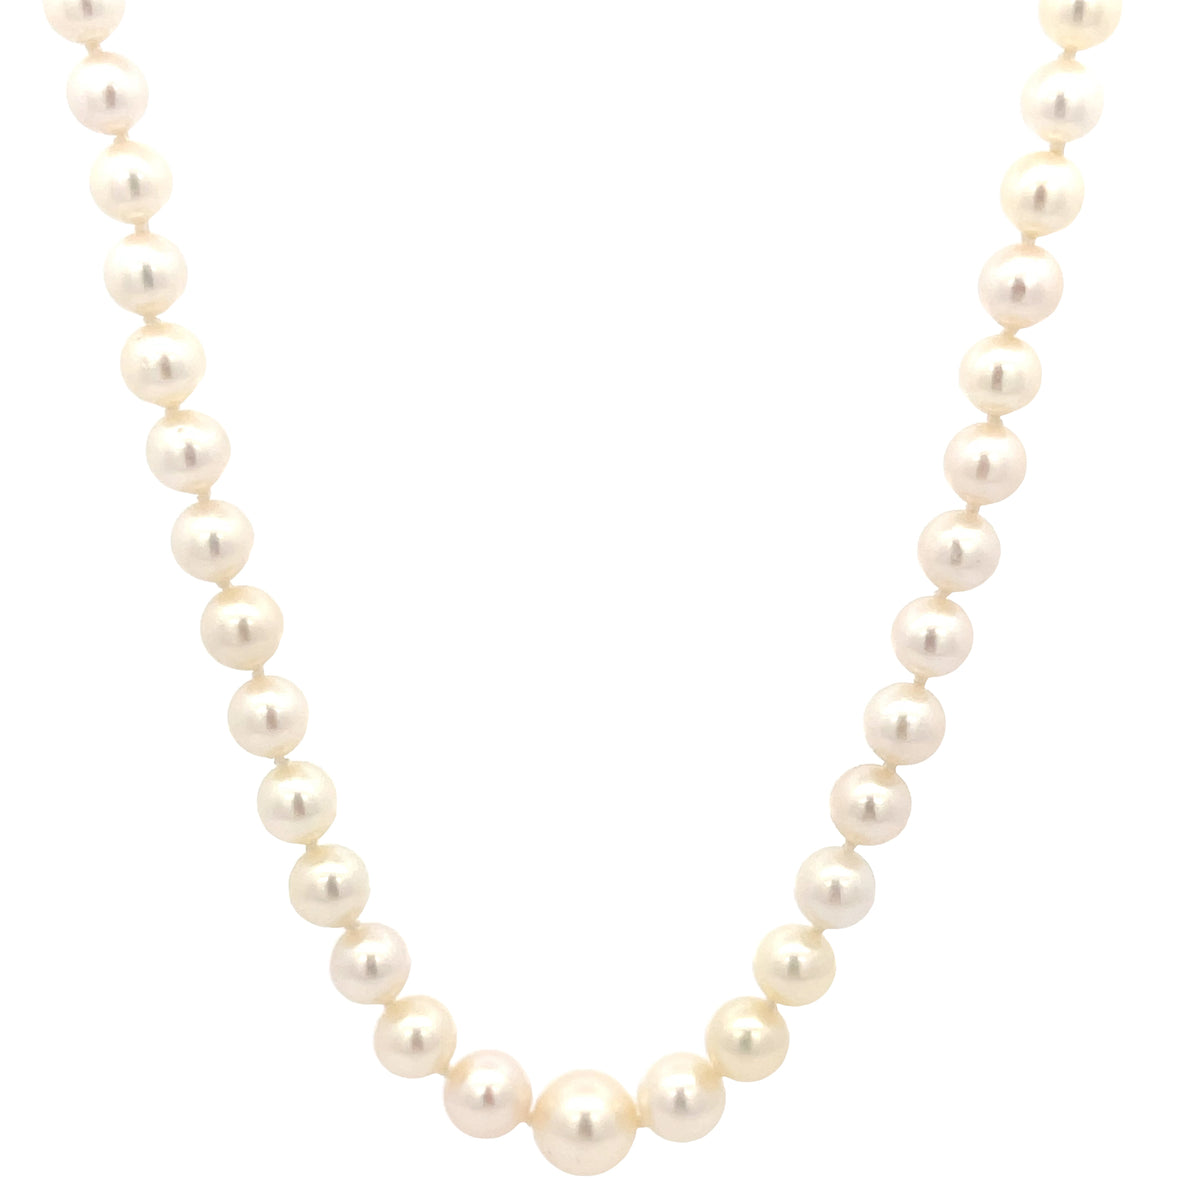 Ladies 14k yellow gold Cultured  graduated 8-4 mm Akoya Pearl Necklace